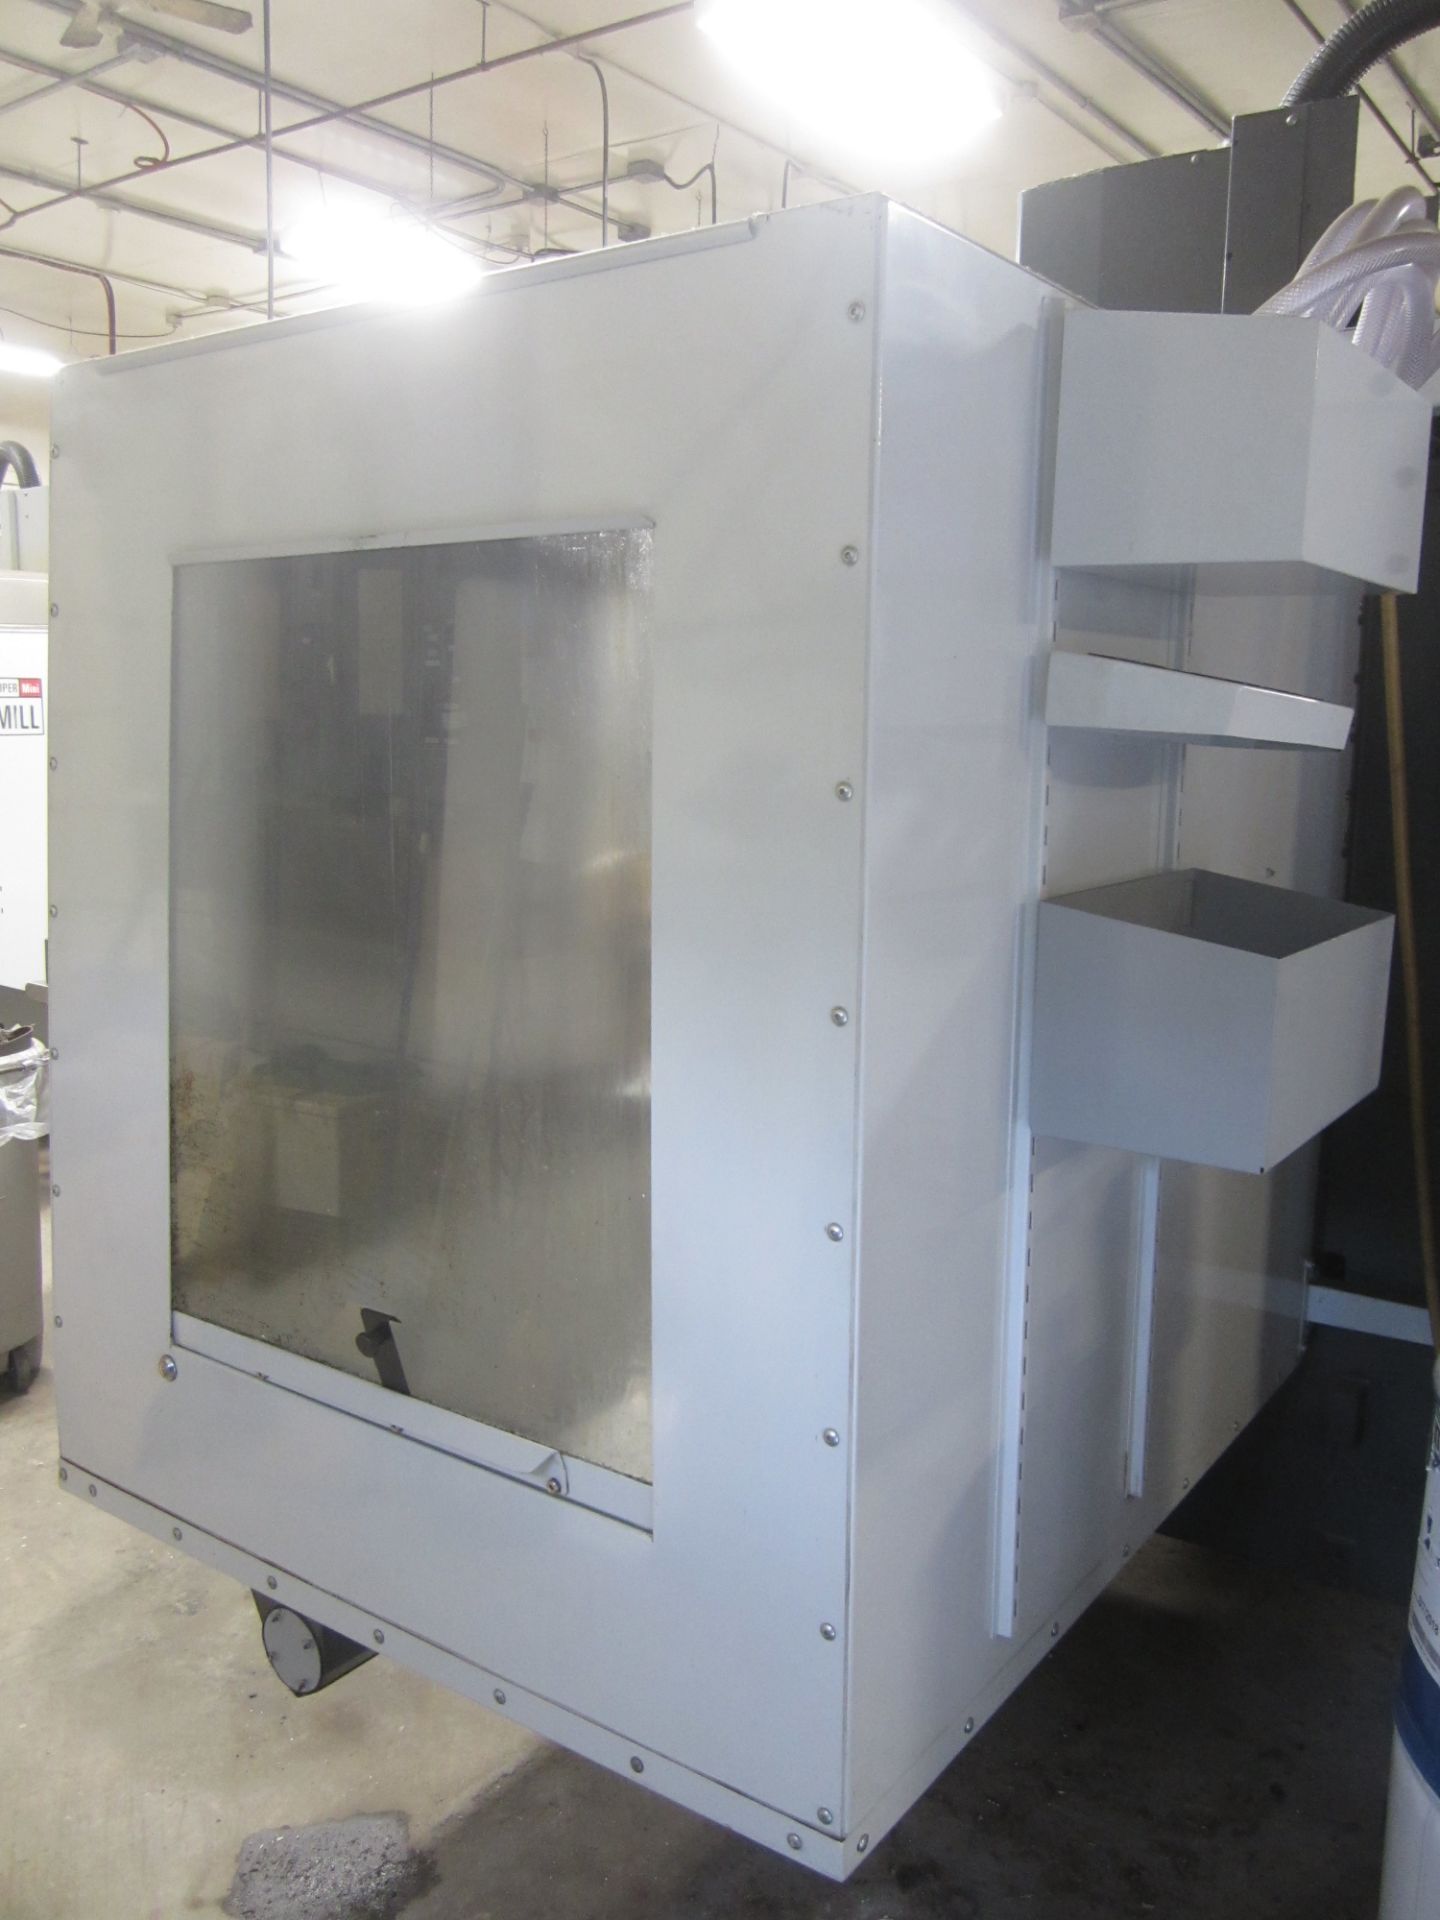 Haas TM2P CNC Vertical Machining Center, s/n 1099977, New 2012, Haas CNC Control, 40 Taper, 10 - Image 11 of 14